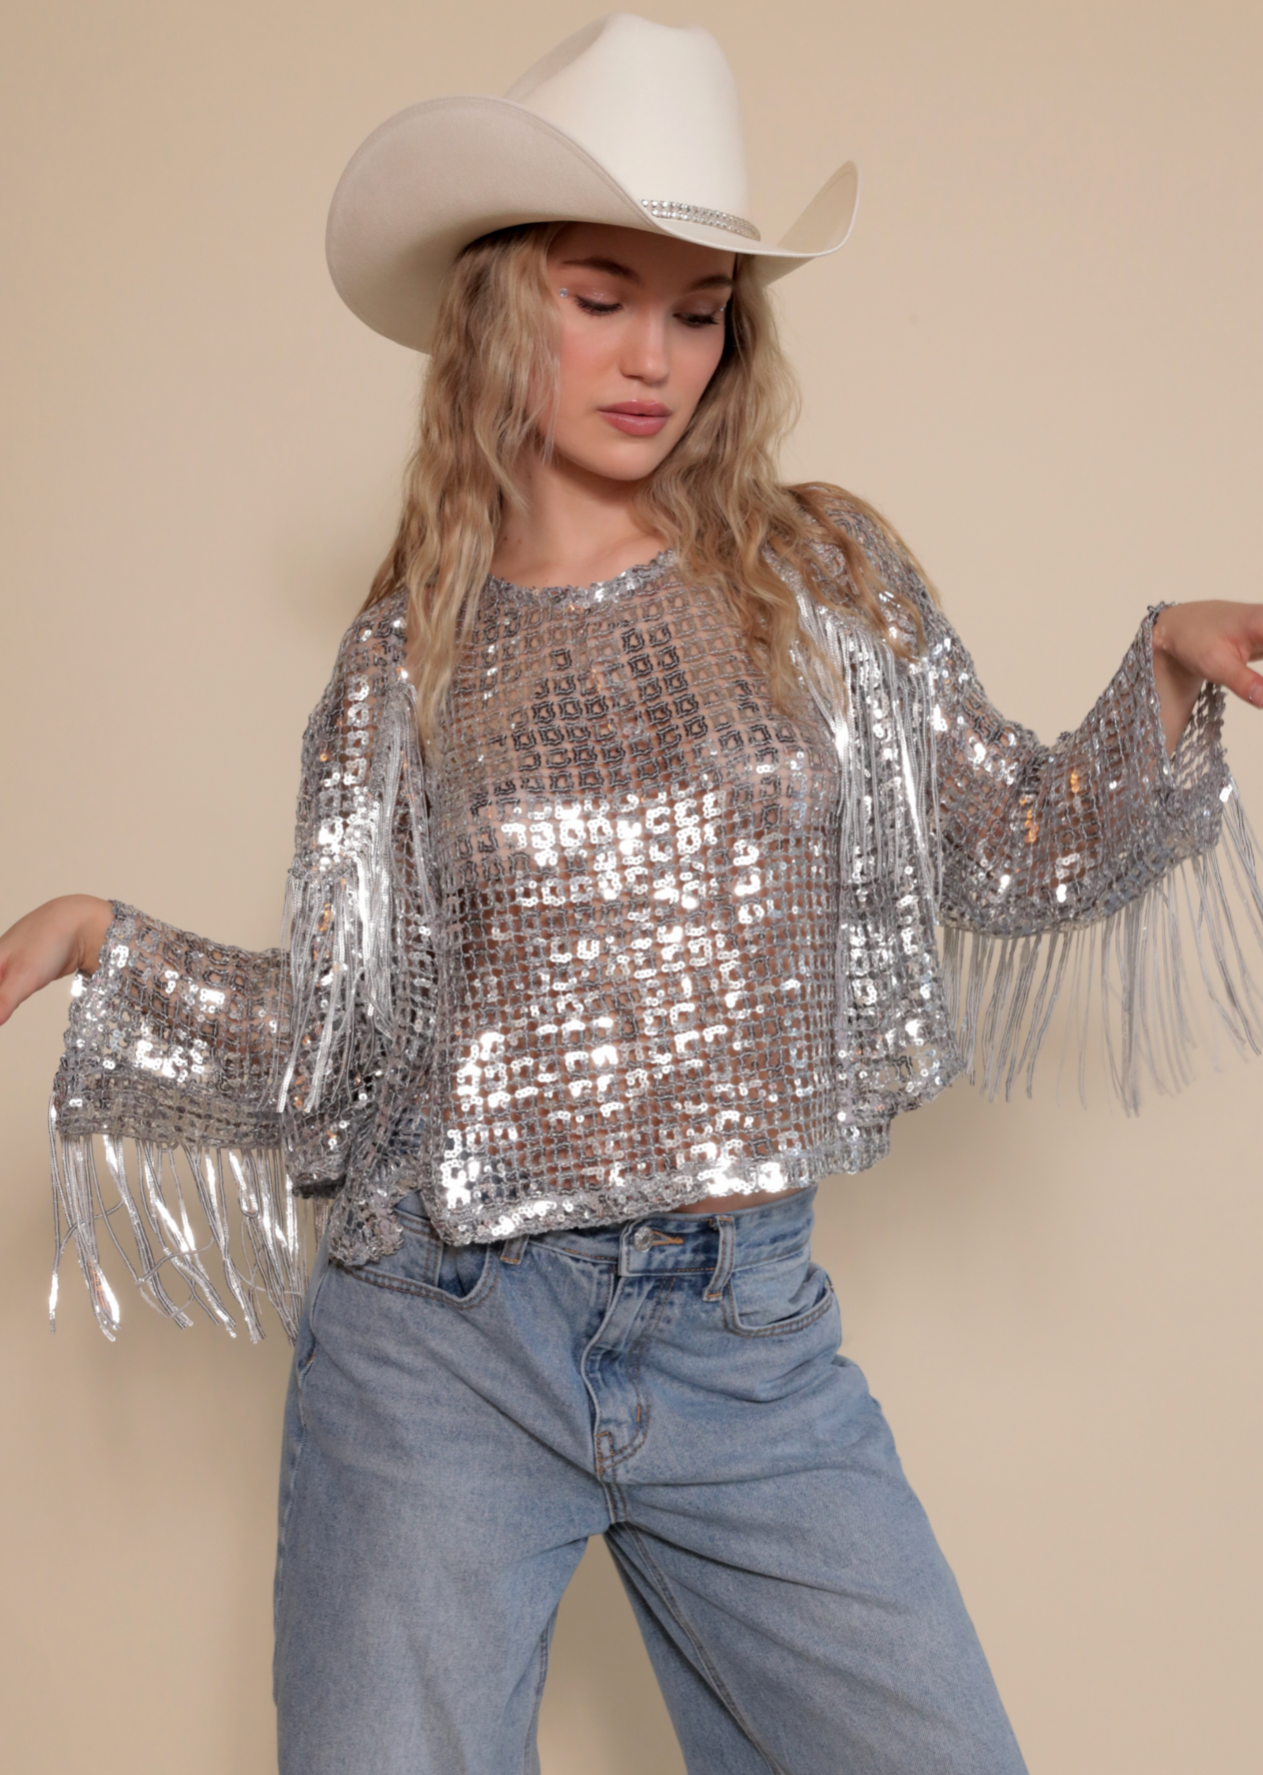 Silver basic tank with square sequin pattern and matching fringe jacket paired with white cowboy hat.